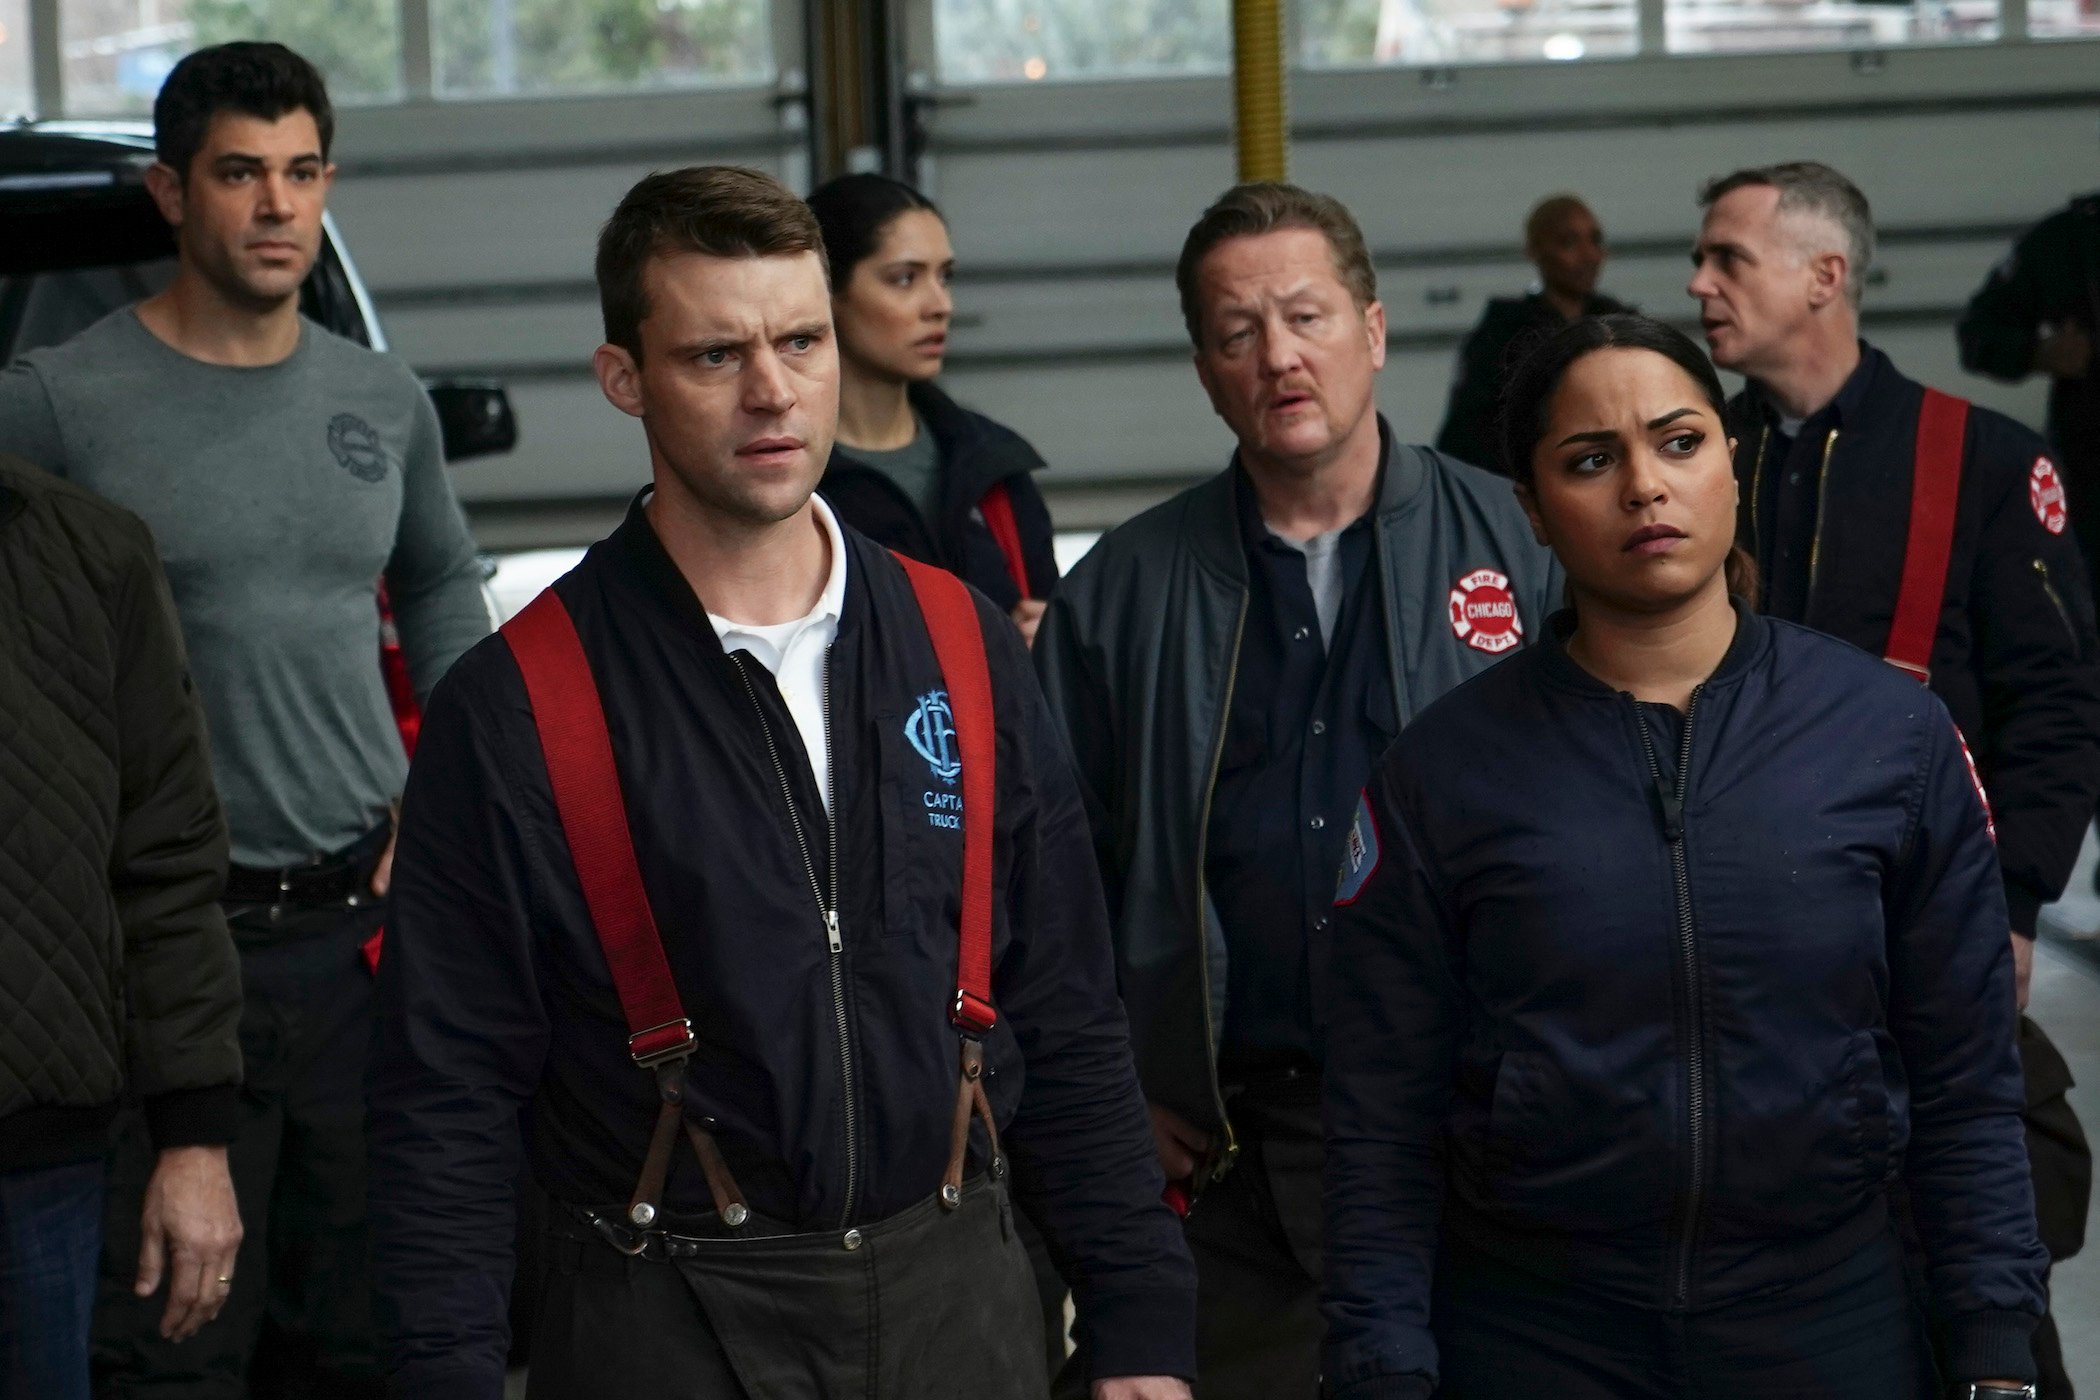 Matt Casey and Gabriela Dawson in 'Chicago Fire' standing in front of others in the firehouse. Matt Casey left 'Chicago Fire' Season 10